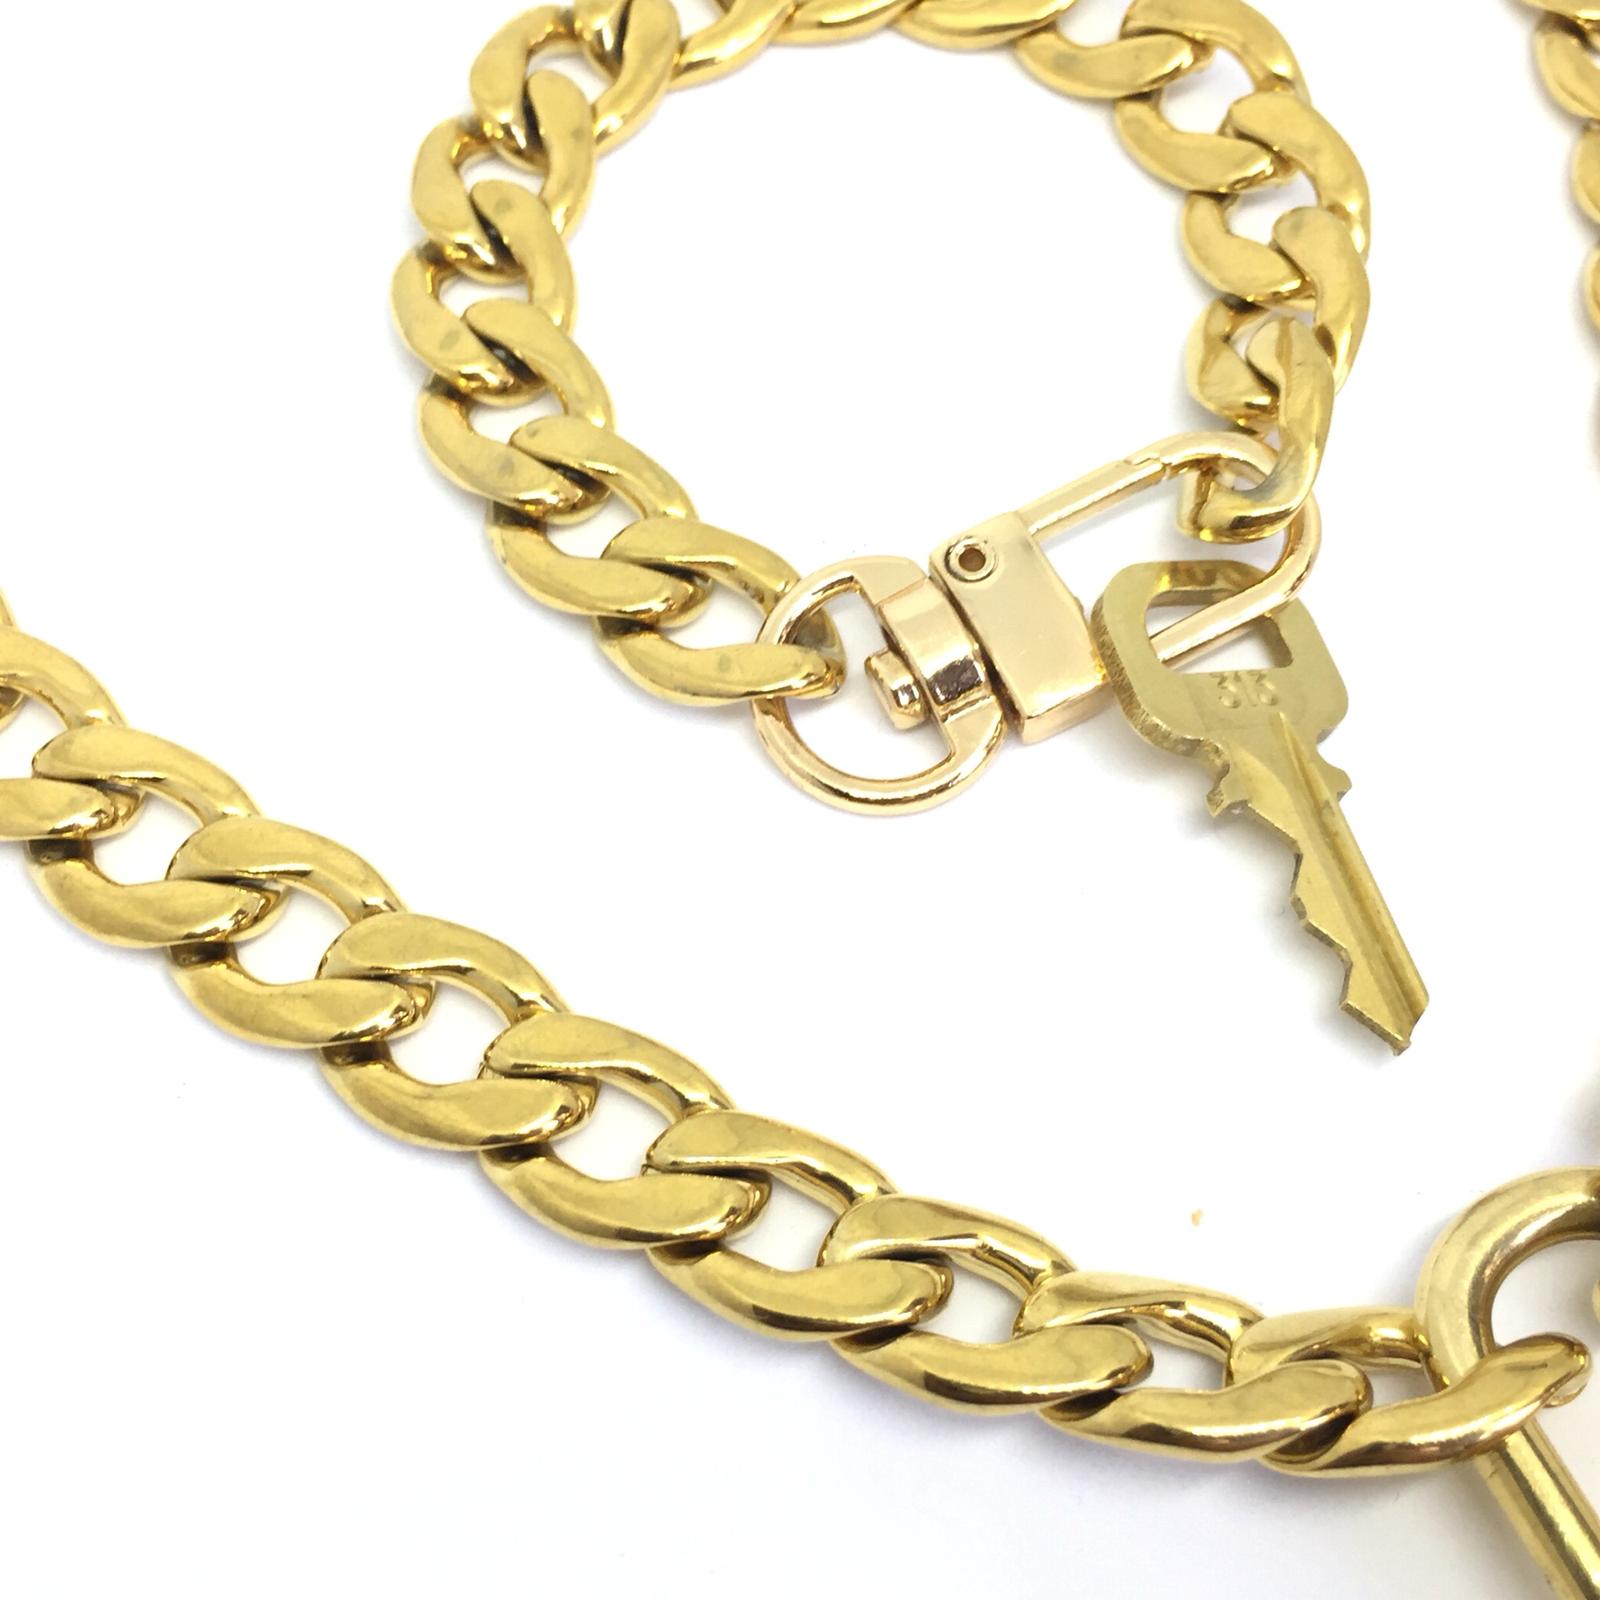 Louis Vuitton Jewelry By Virgil Abloh Closer Look  Hypebeast